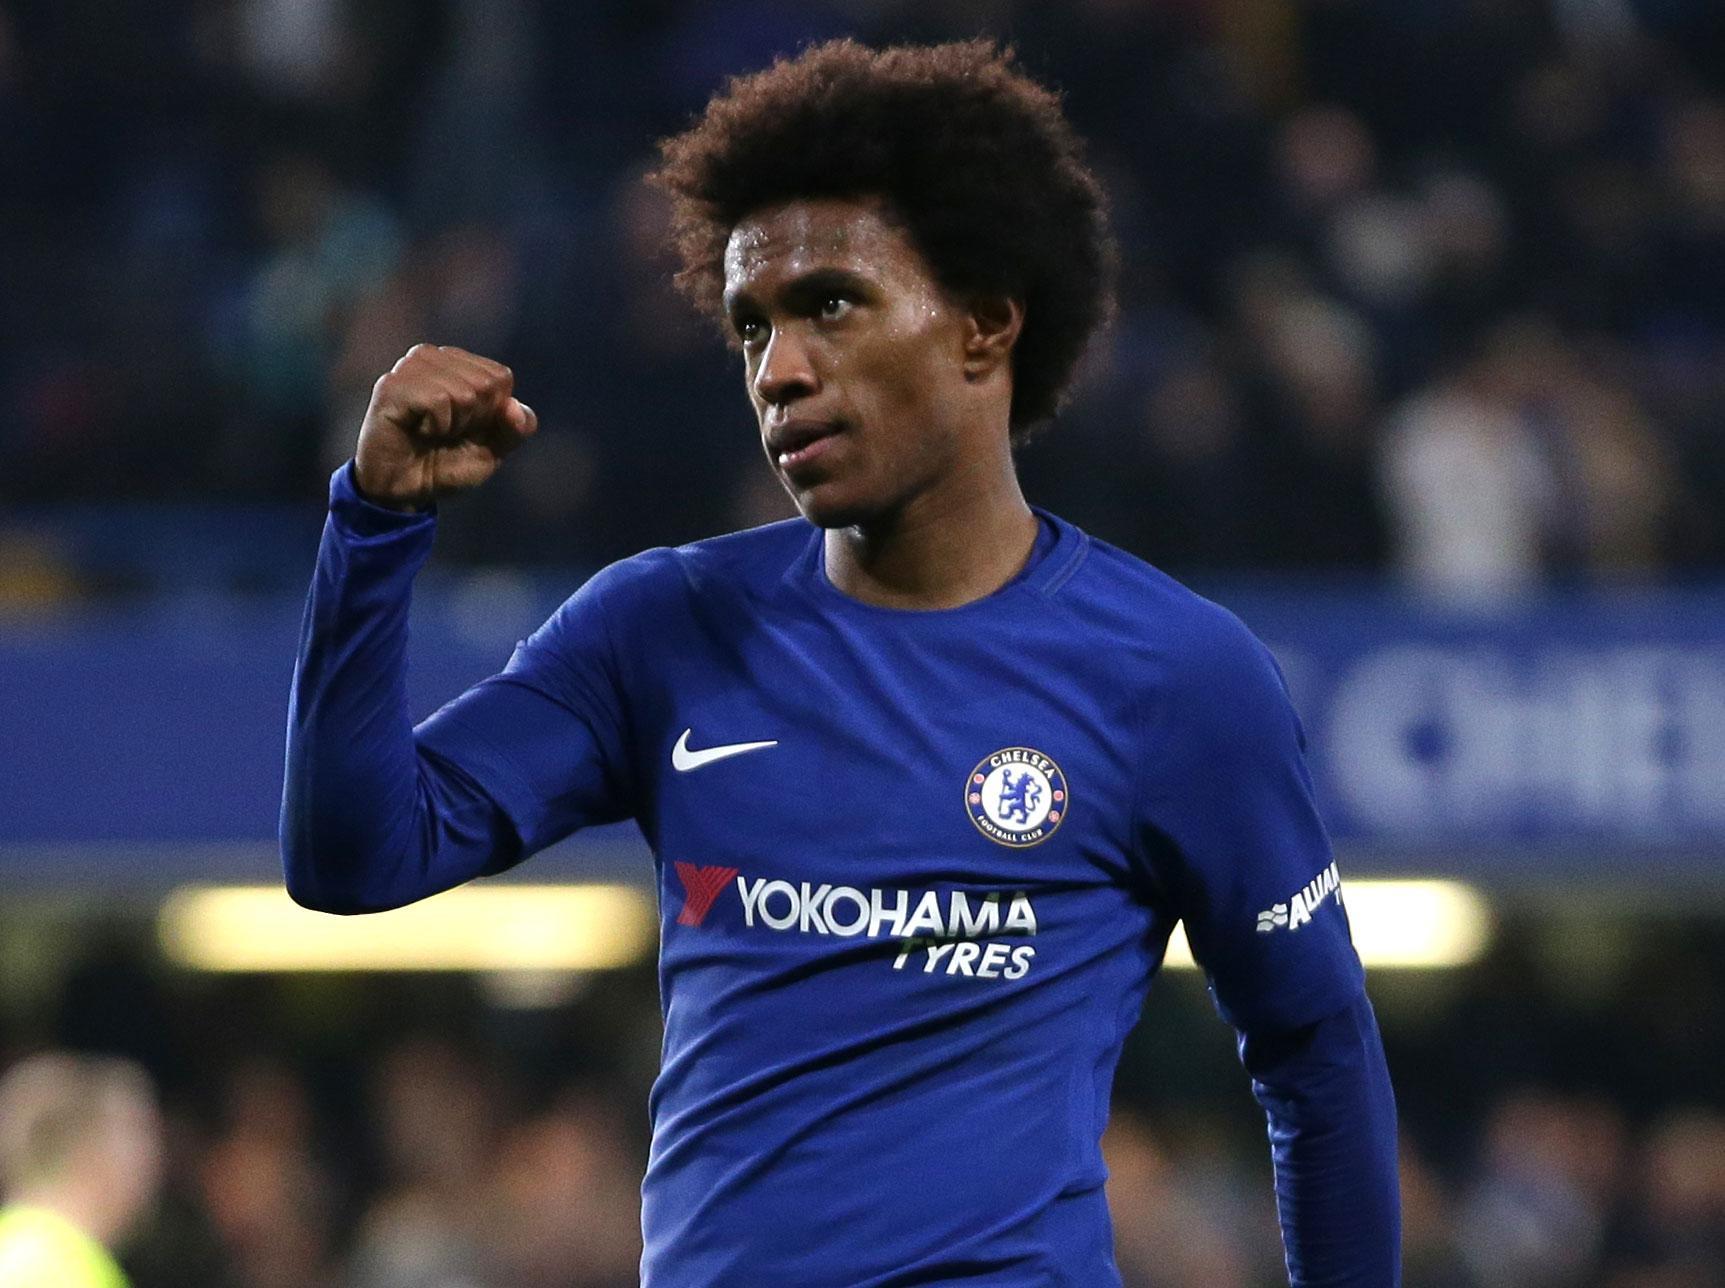 Willian has been in fine goalscoring form but is not guaranteed a place in Chelsea's first team